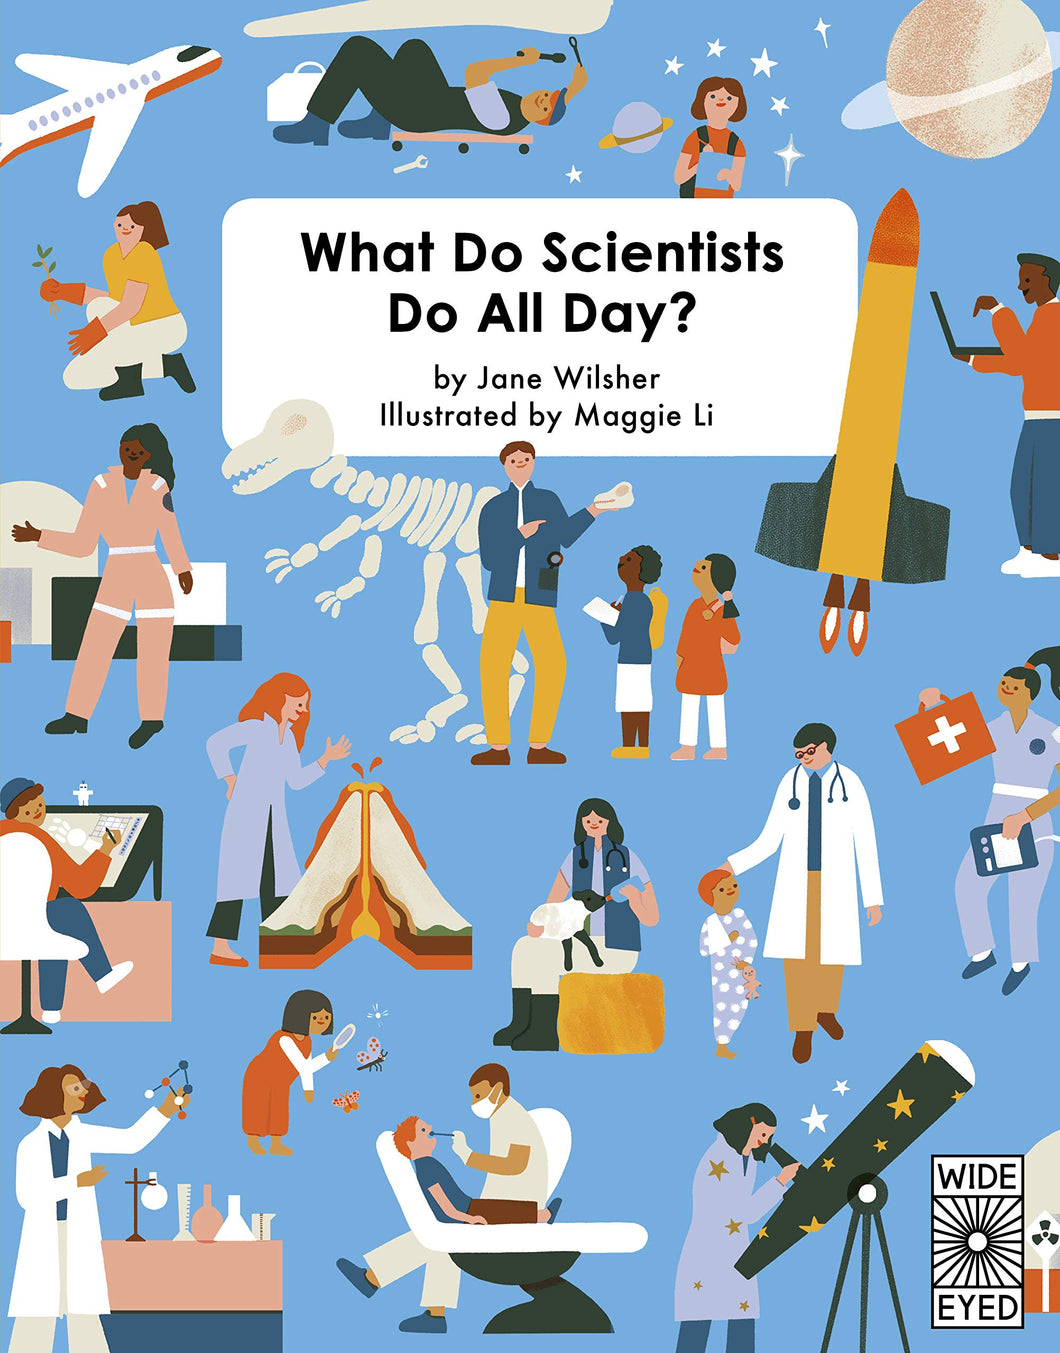 Blue book cover with colourful illustrations of people doing different activities. People are variety of skin colours and genders. Activities include planting, drawing, working in a lab, dentistry, stargazing, feeding a sheep, and showing children a skull. 